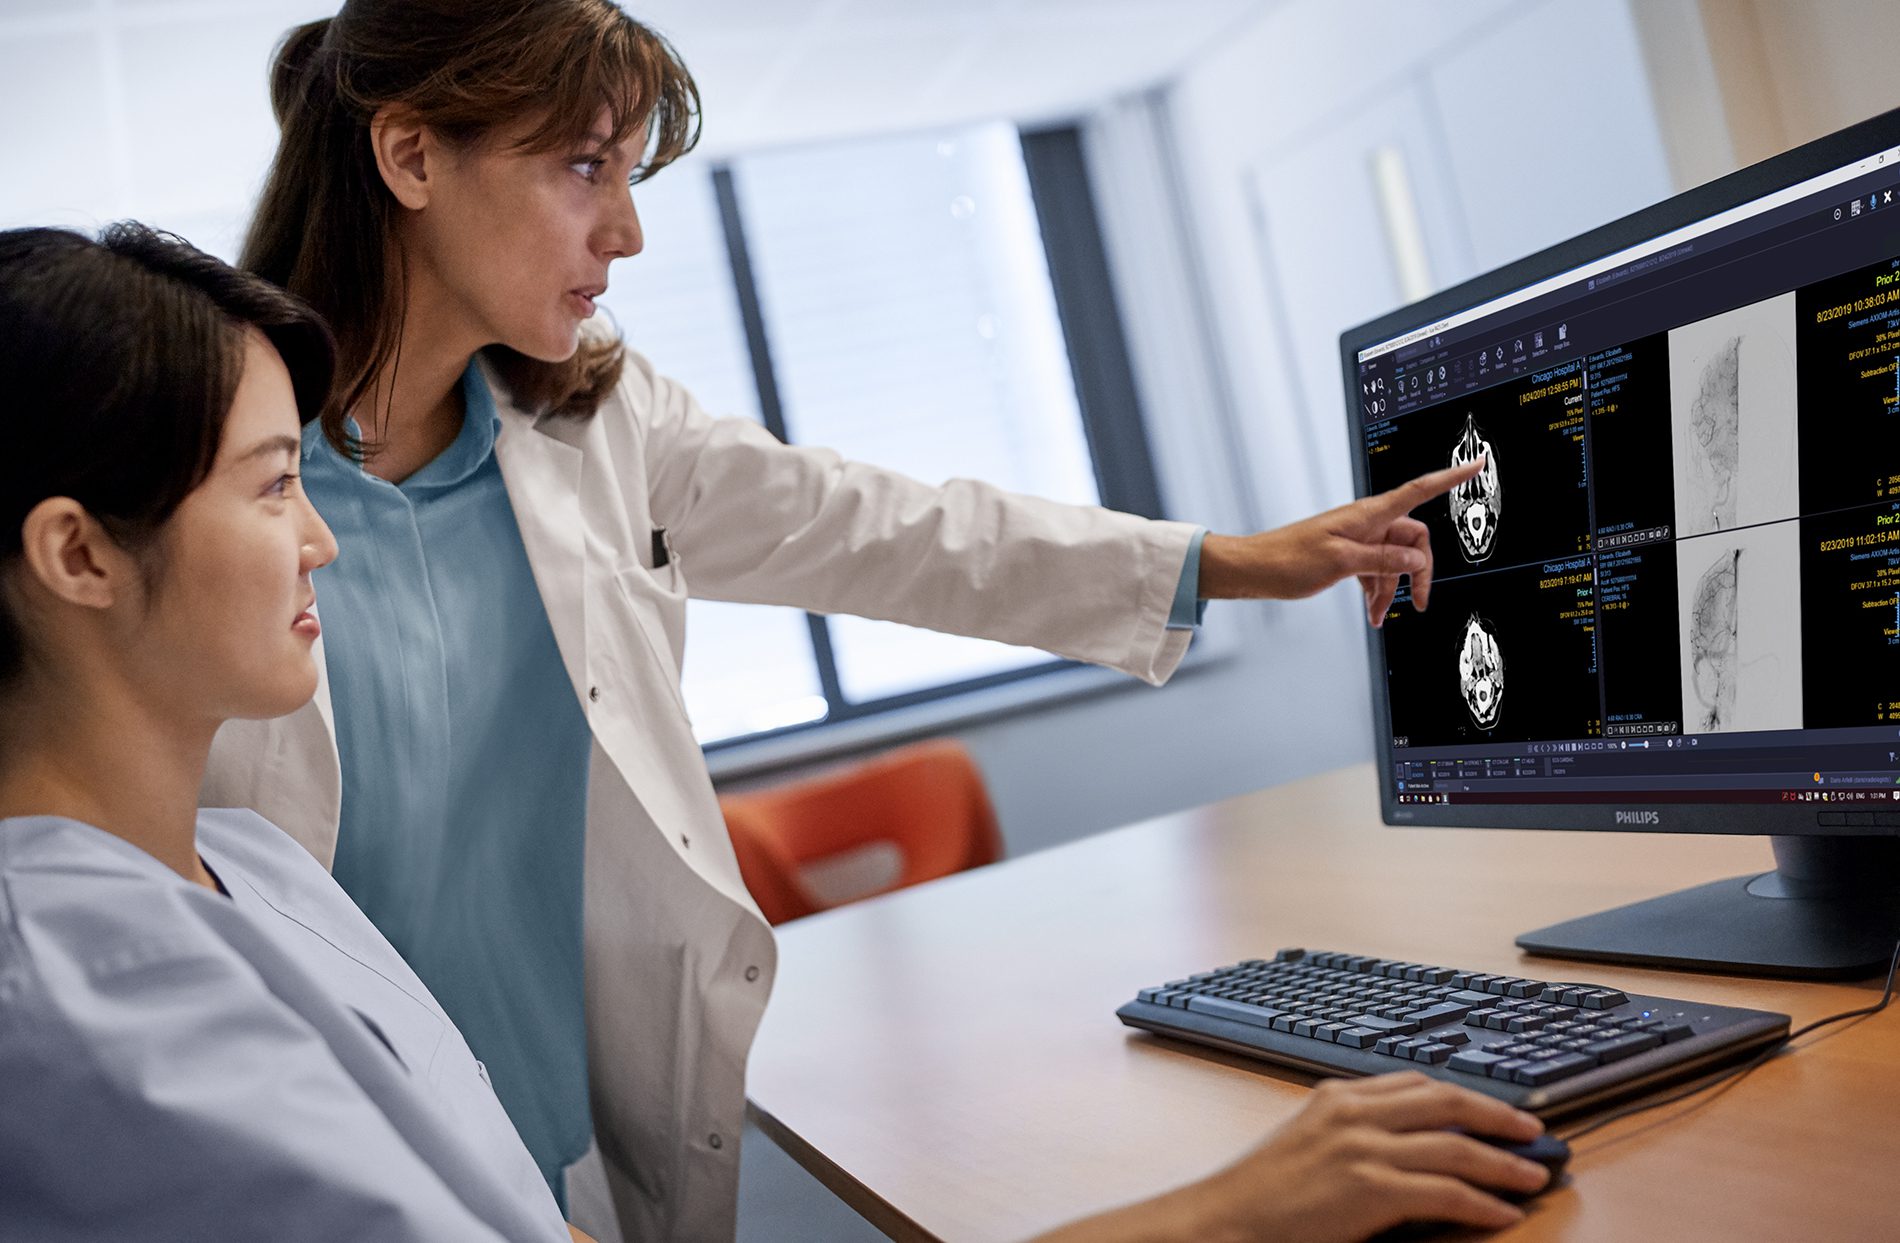 Philips Expands Enterprise Imaging Portfolio with AI-Powered Solutions